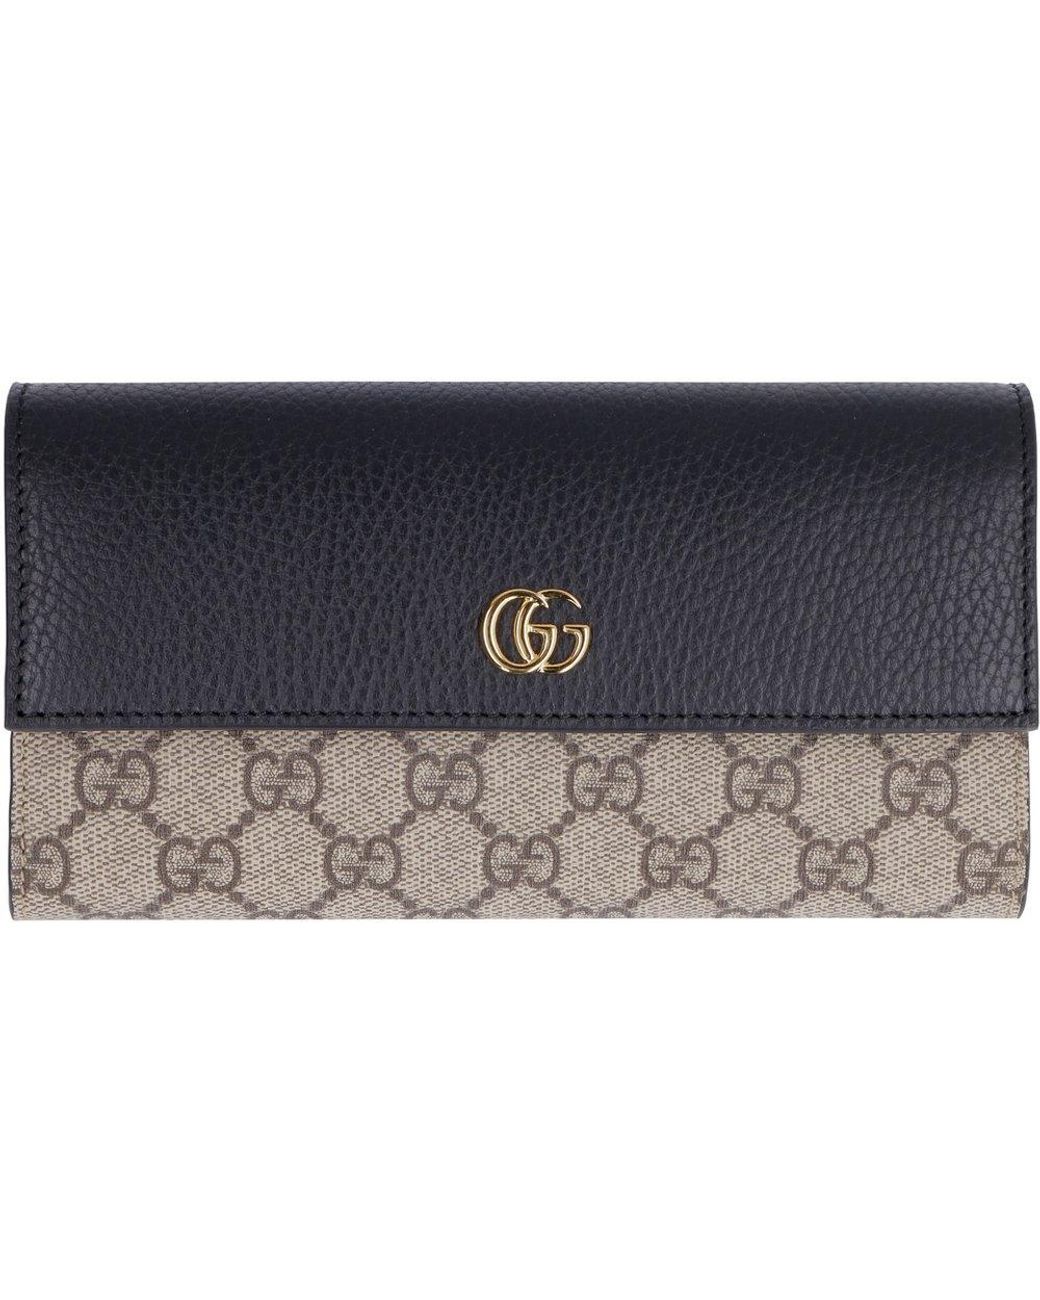 Gucci GG Marmont Continental Wallet in Black | Lyst Canada